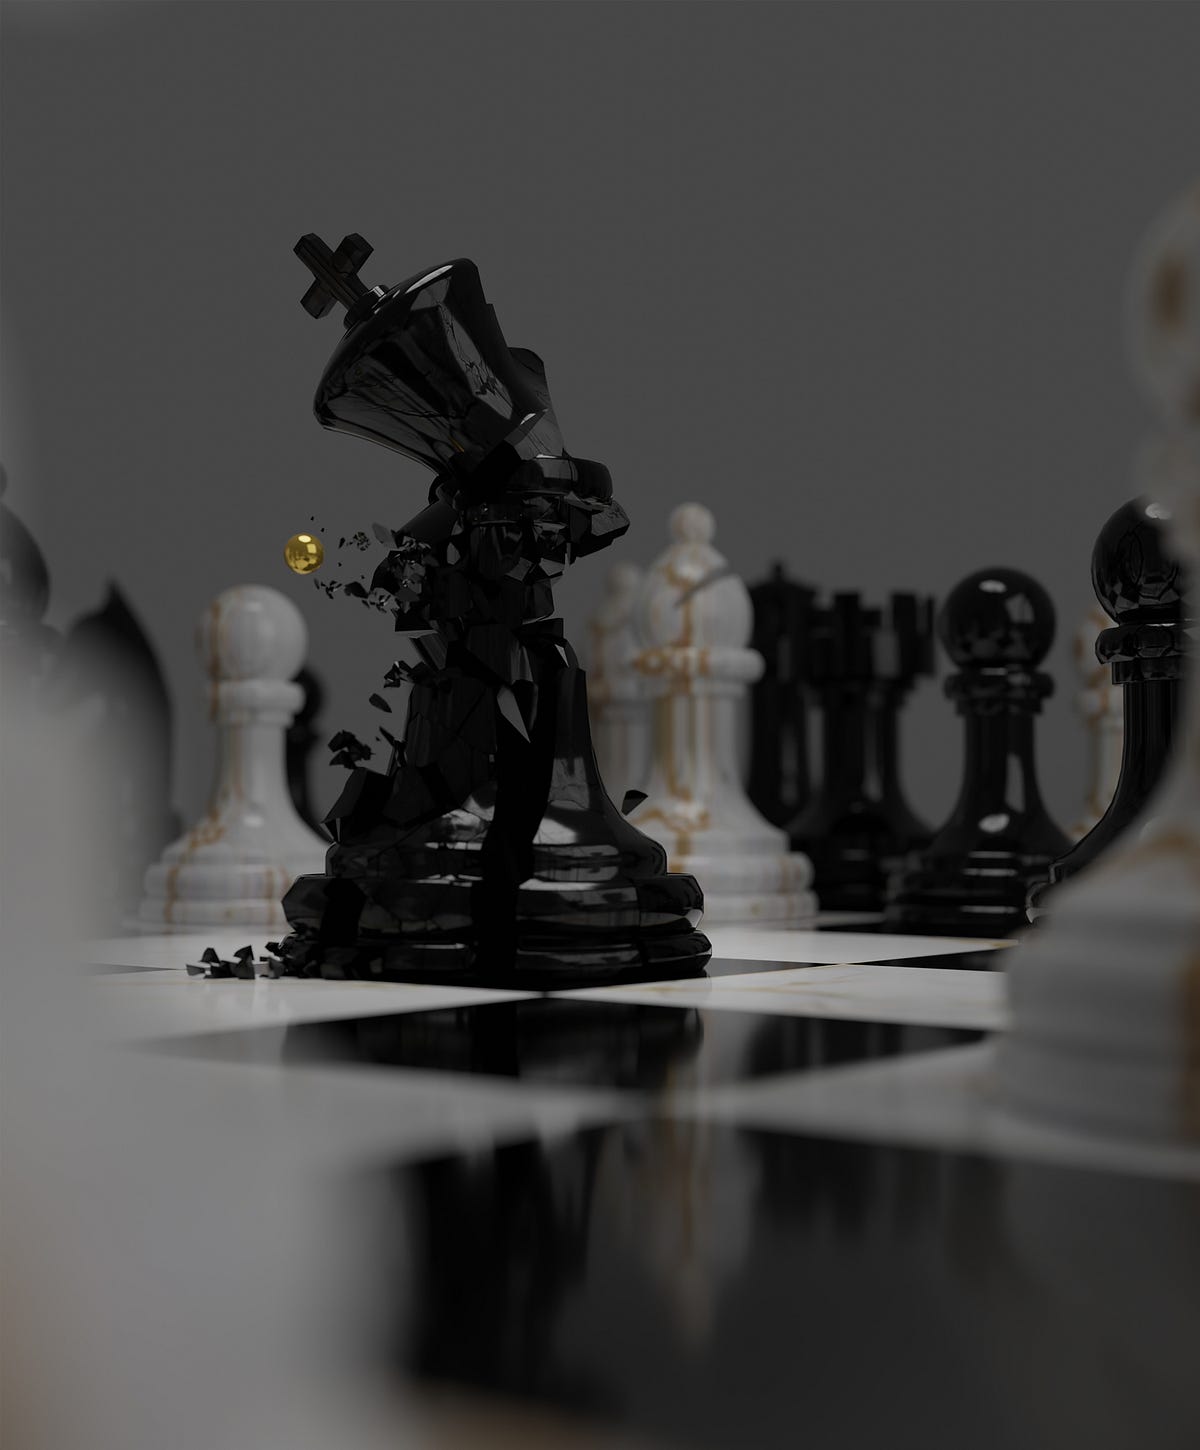 AI has dominated chess for 25 years, but now it wants to lose